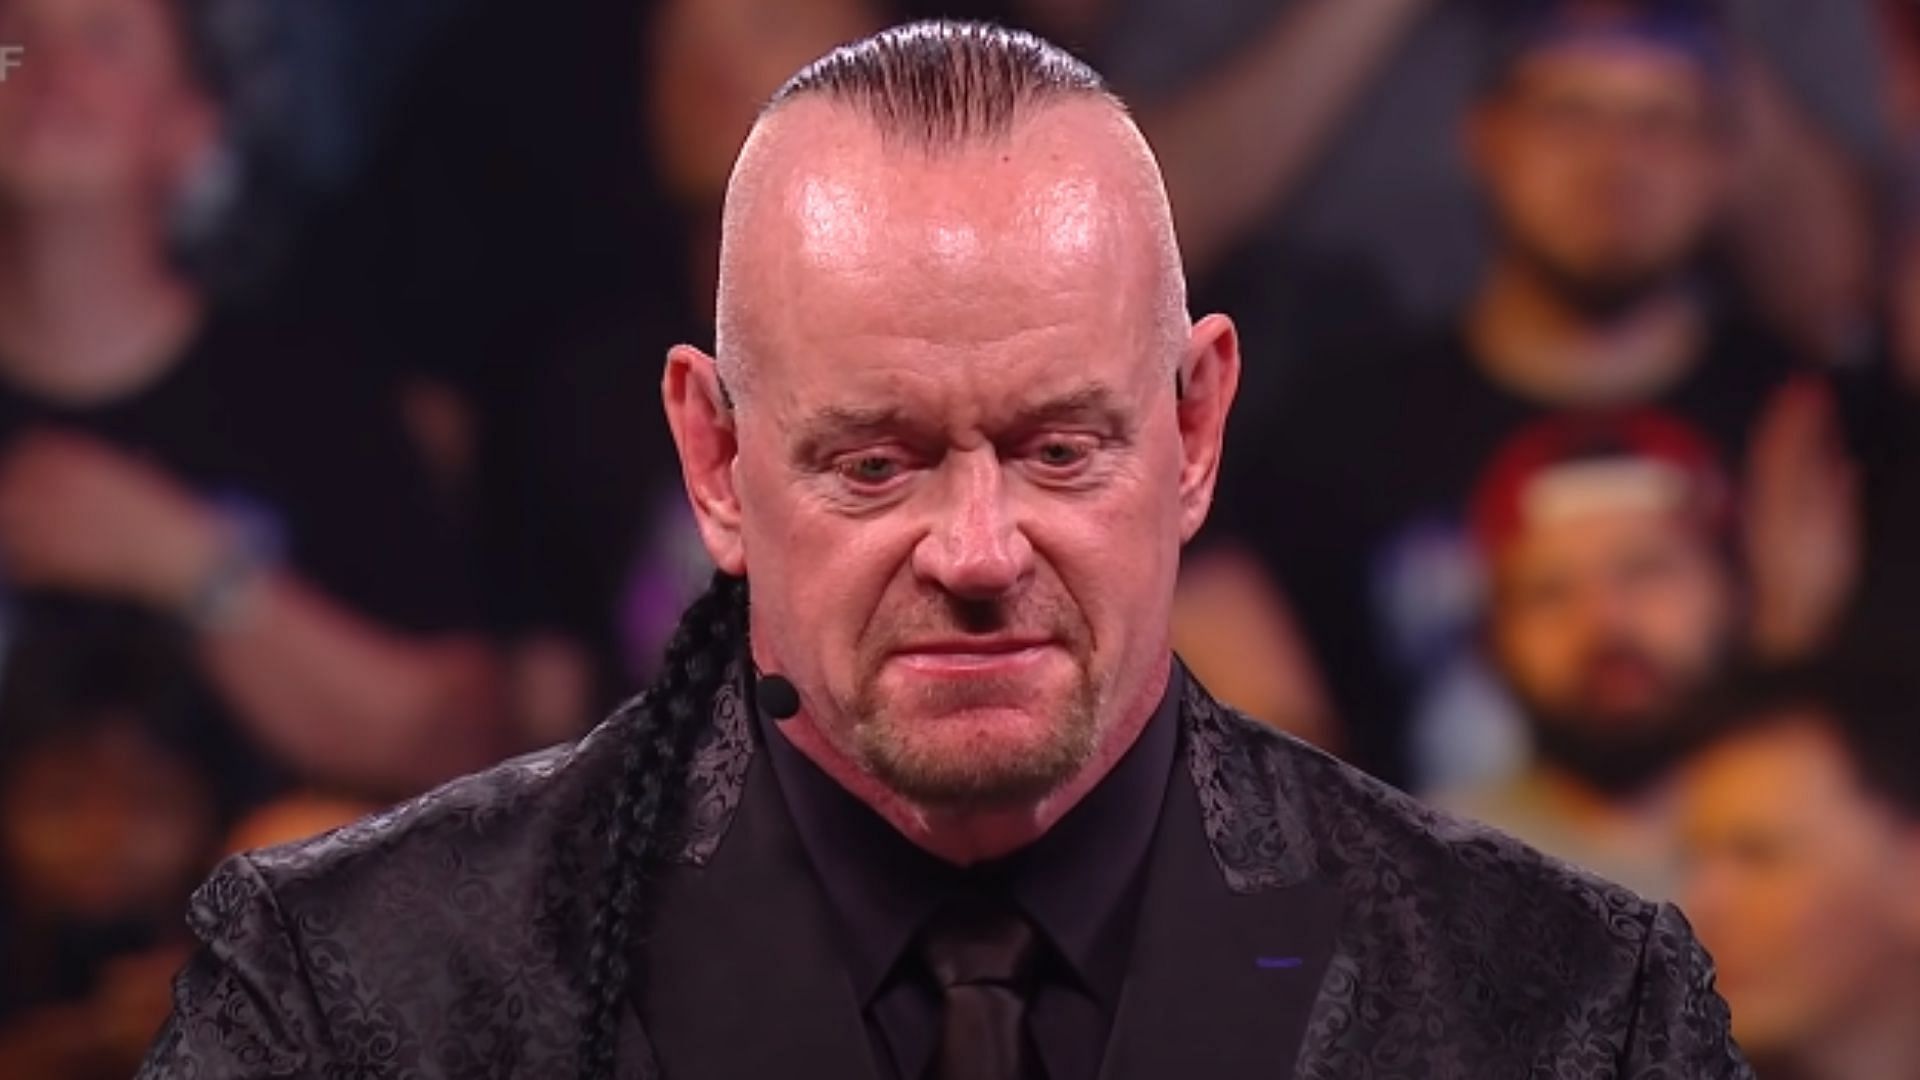 The Undertaker joined the WWE Hall of Fame in 2022